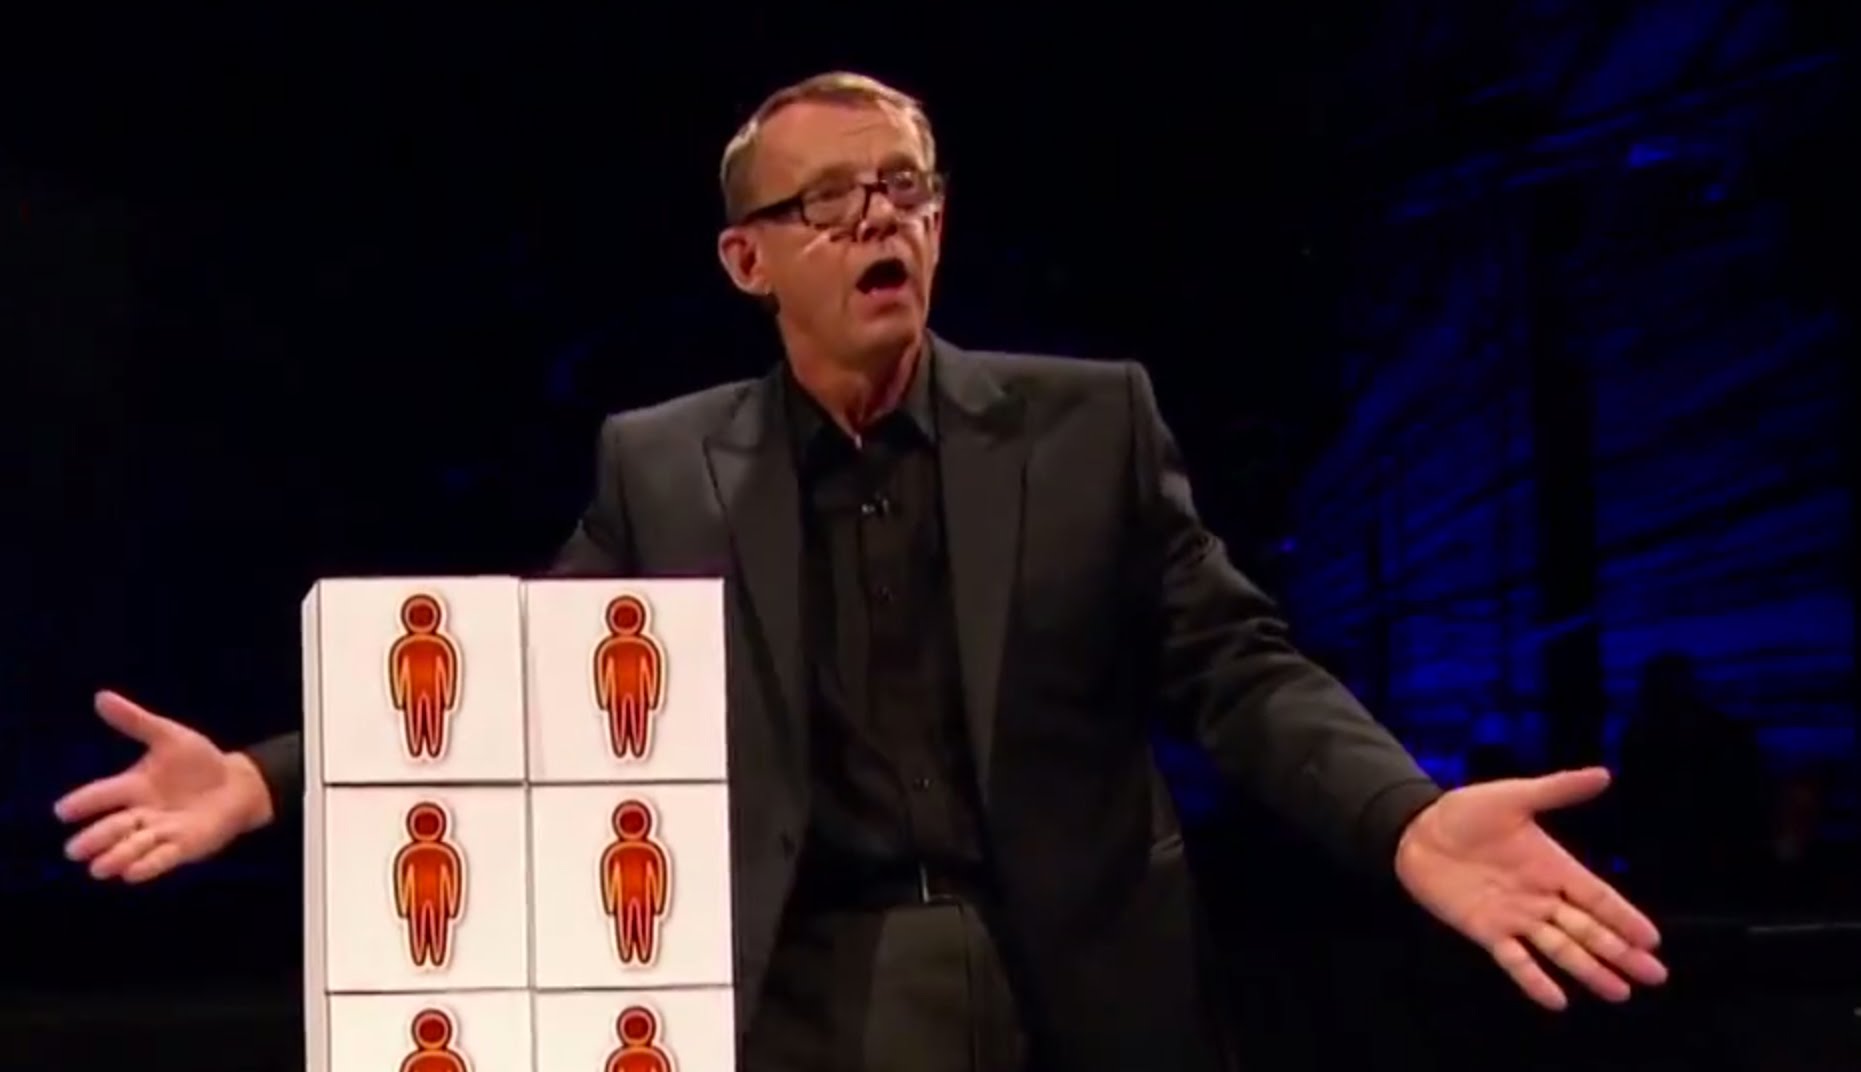 DON’T PANIC — Hans Rosling showing the facts about population – YouTube